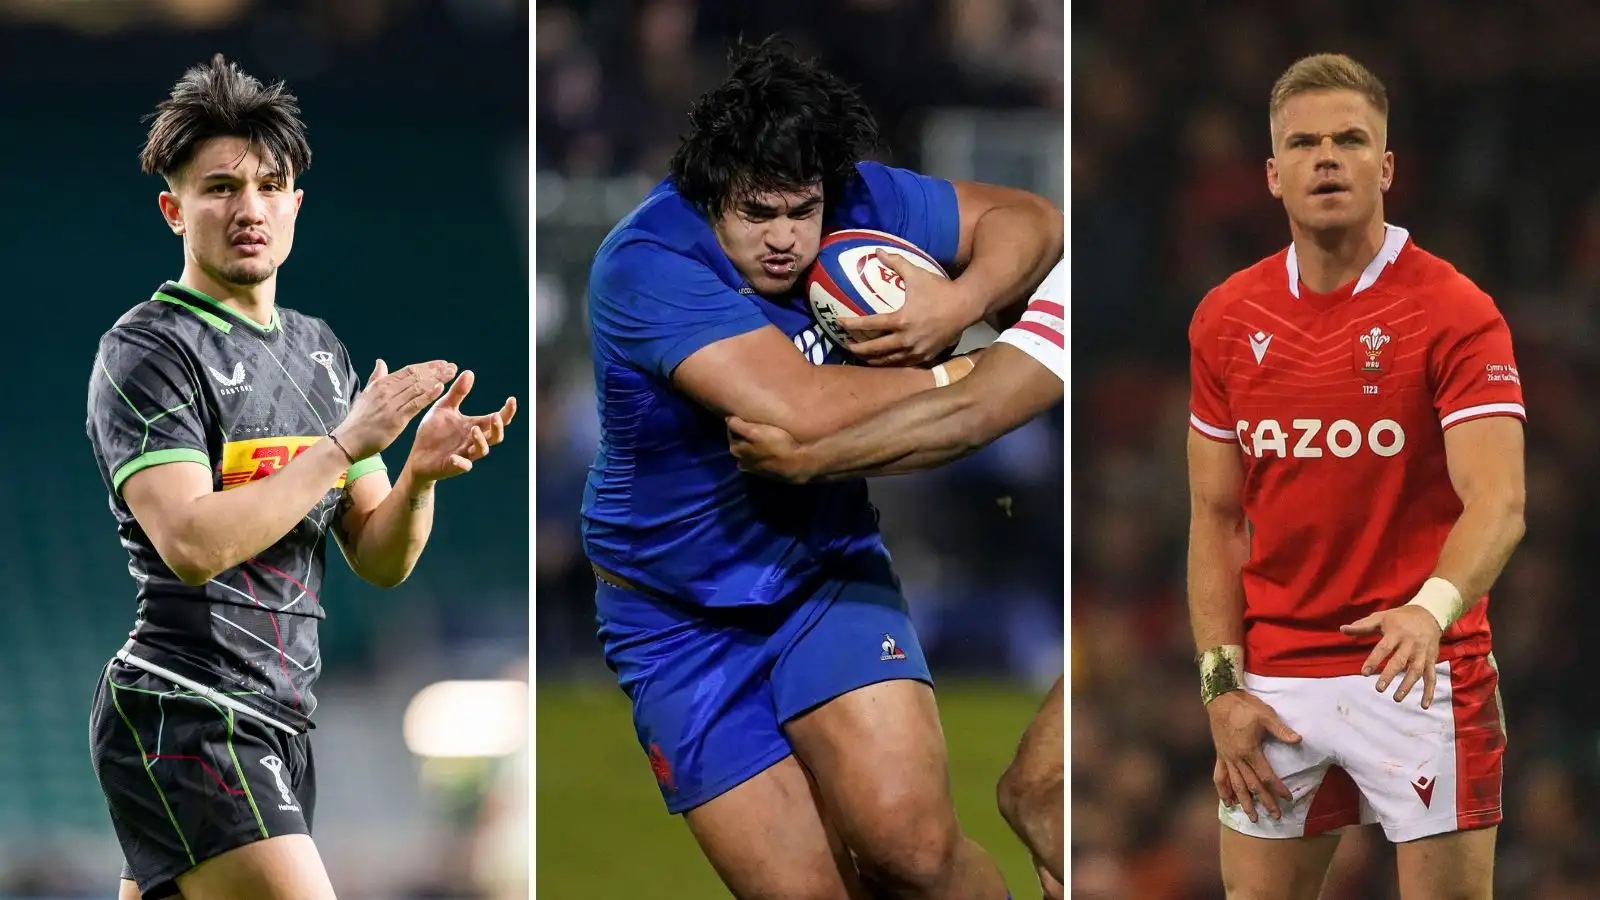 Planet Rugby recaps five rugby rumours and transfers ahead of the weekend, including Marcus Smith, Posolo Tuilagi, Gareth Anscombe, and much more.